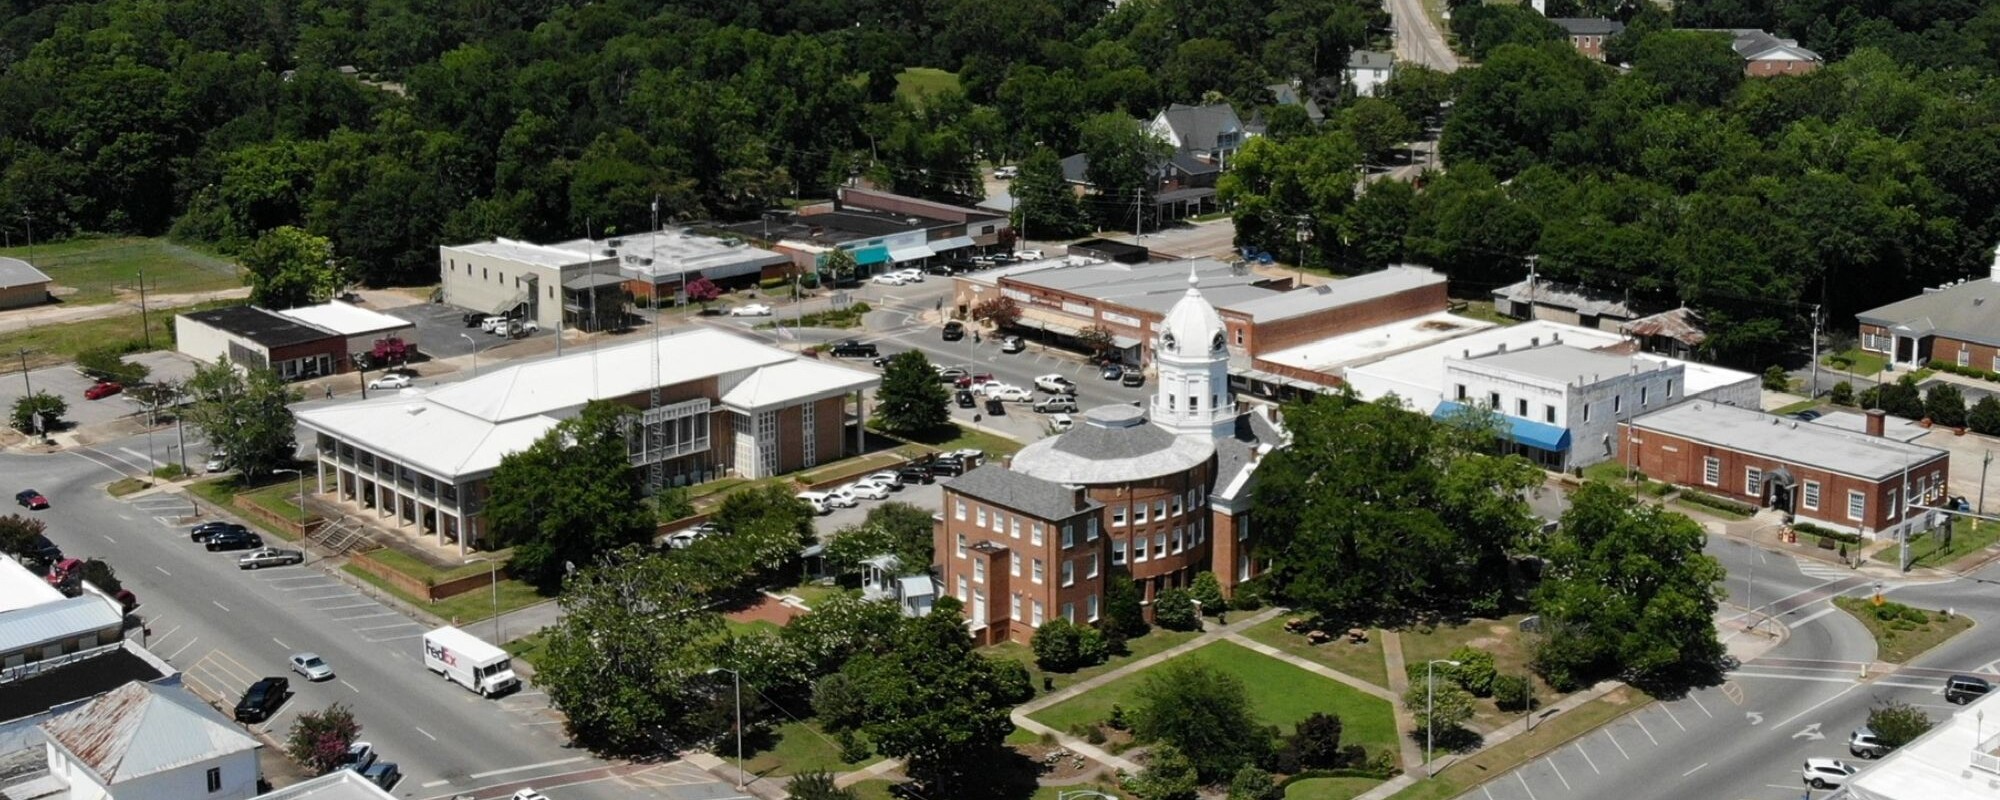 Aerial view of the Monroeville Courthouse Square.